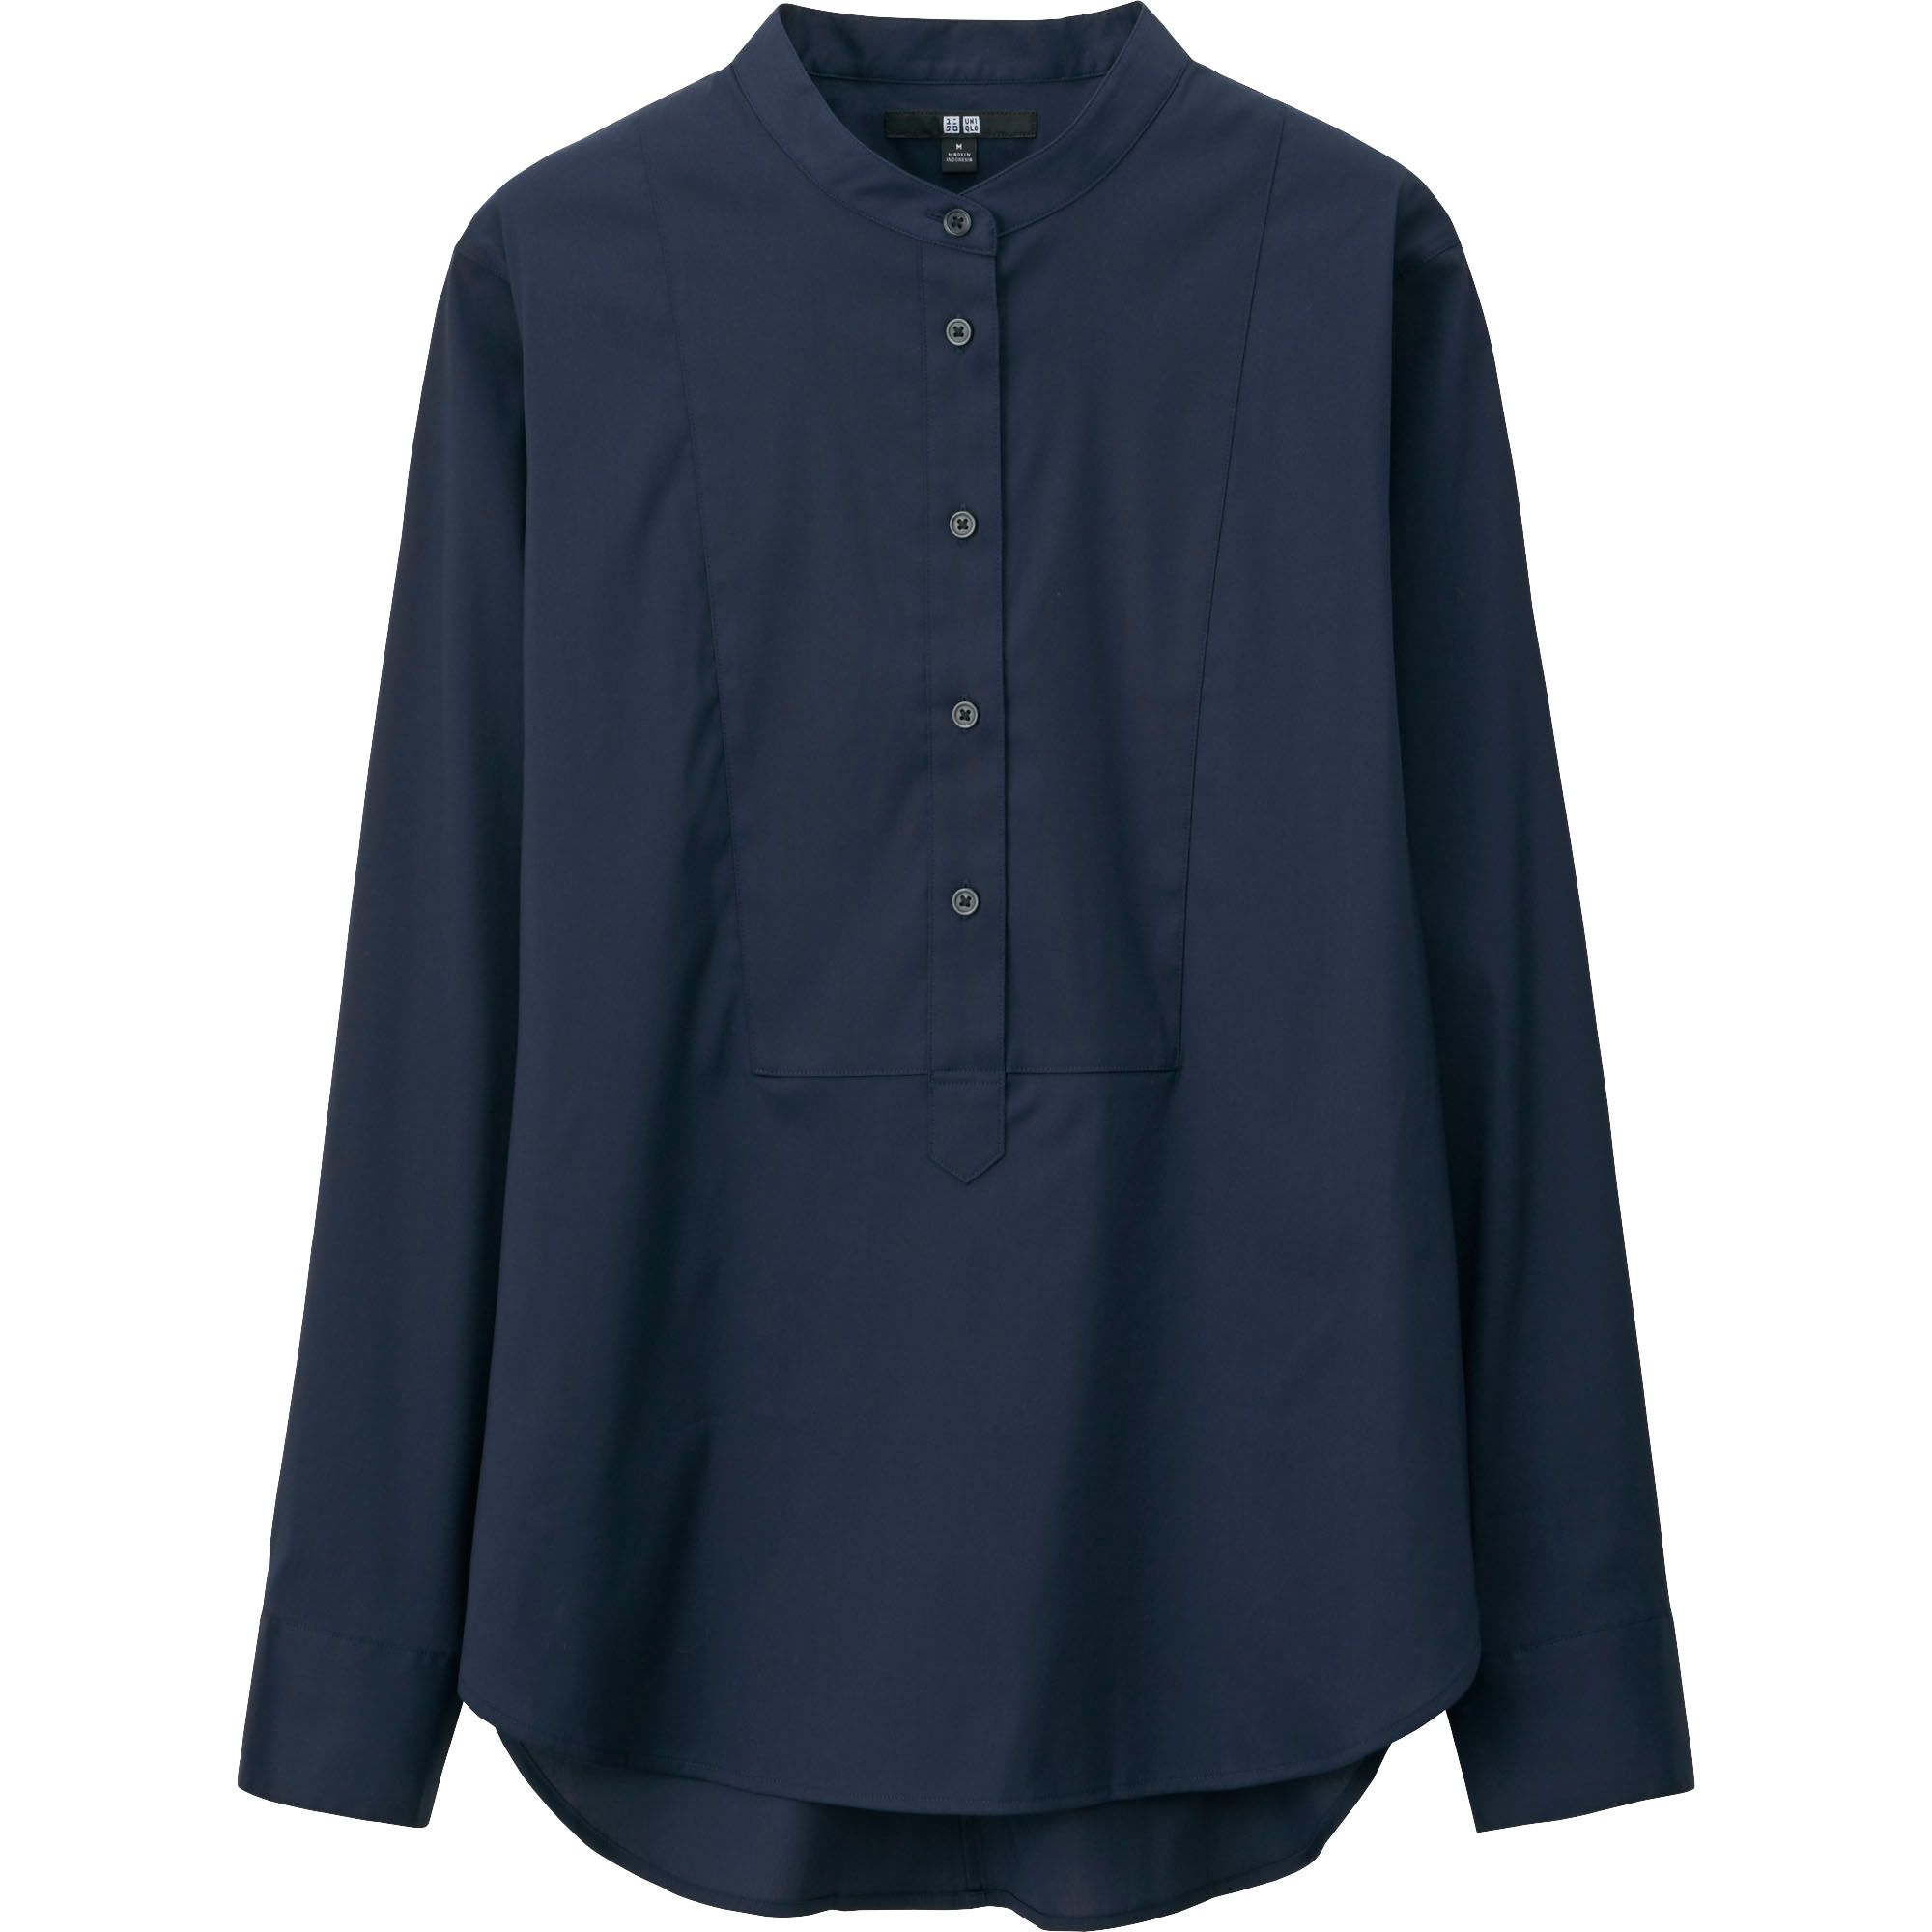 Uniqlo Women Supima Cotton Stretch Long Sleeve Shirt in Blue (NAVY) | Lyst